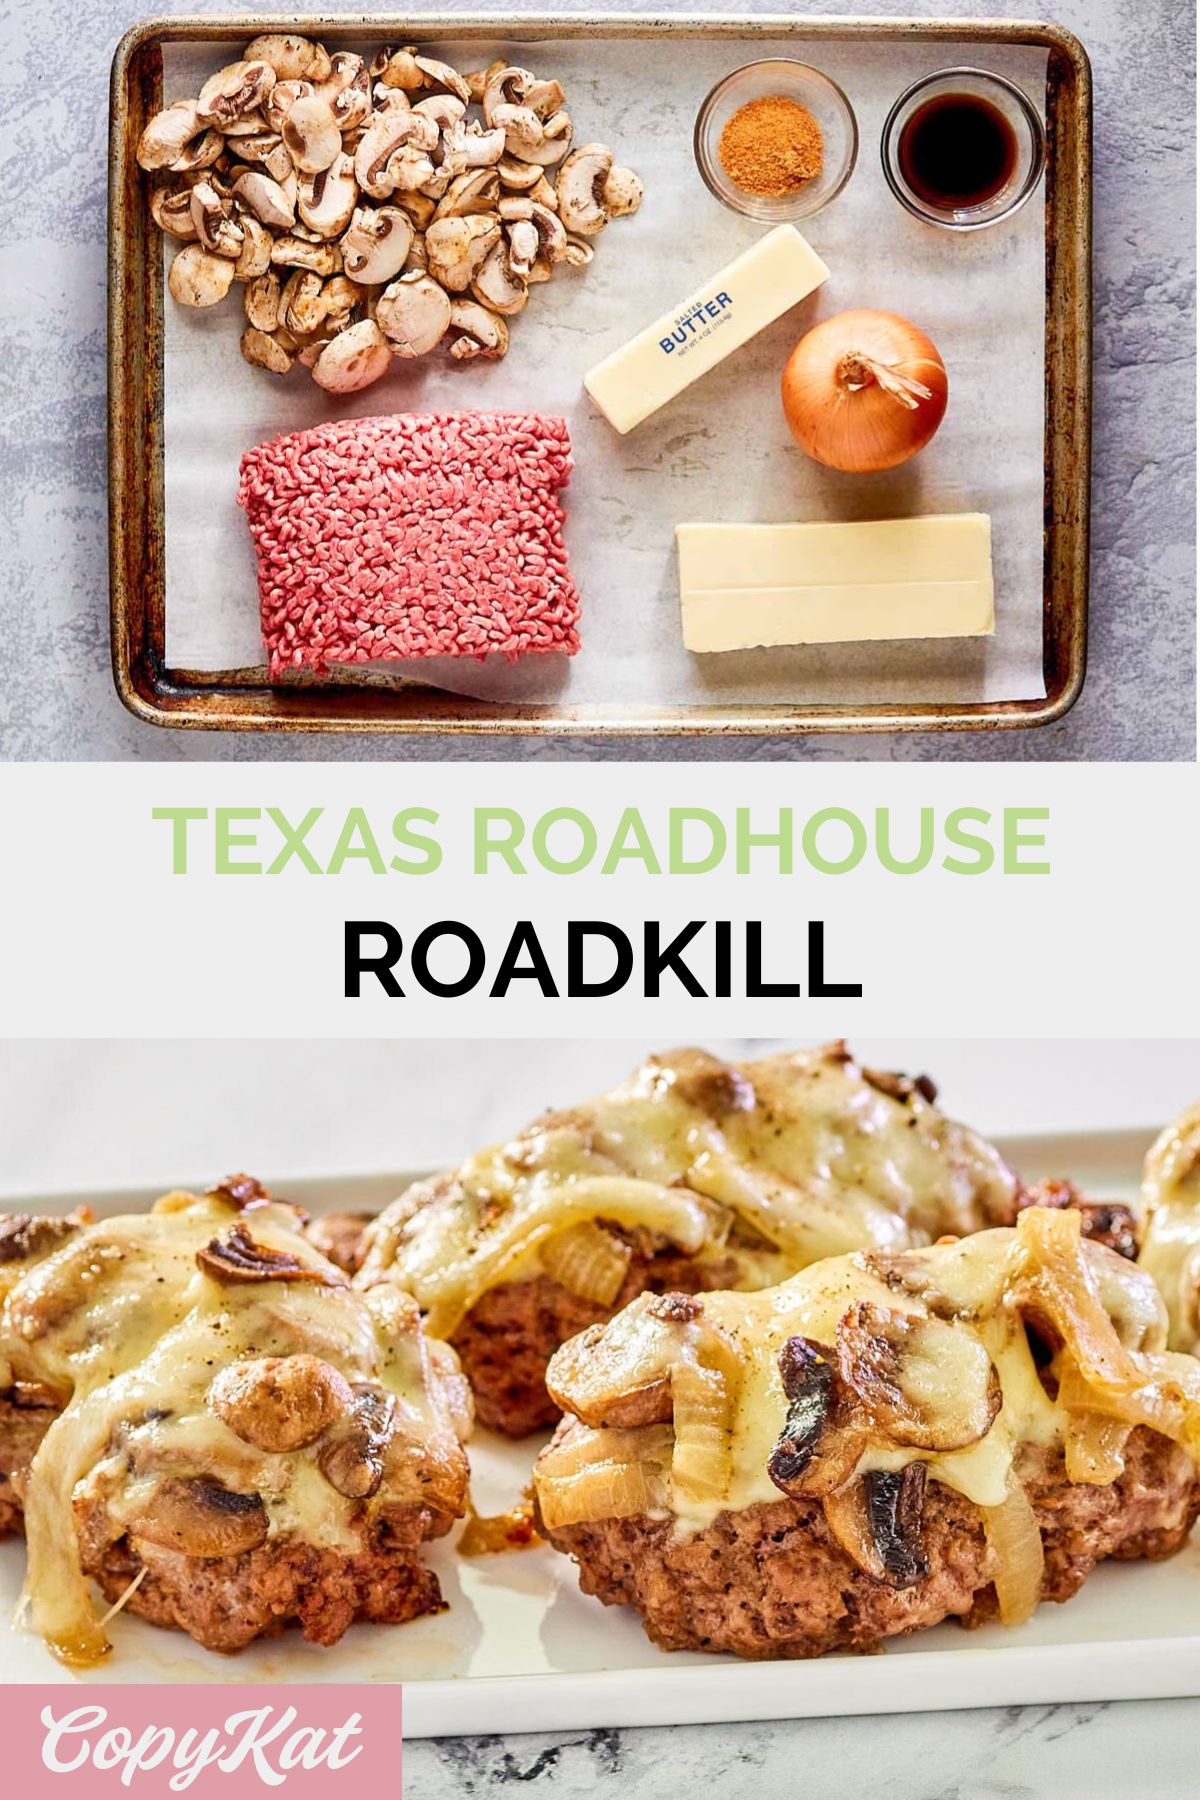 Texas Roadhouse roadkill ingredients and the finished dish.